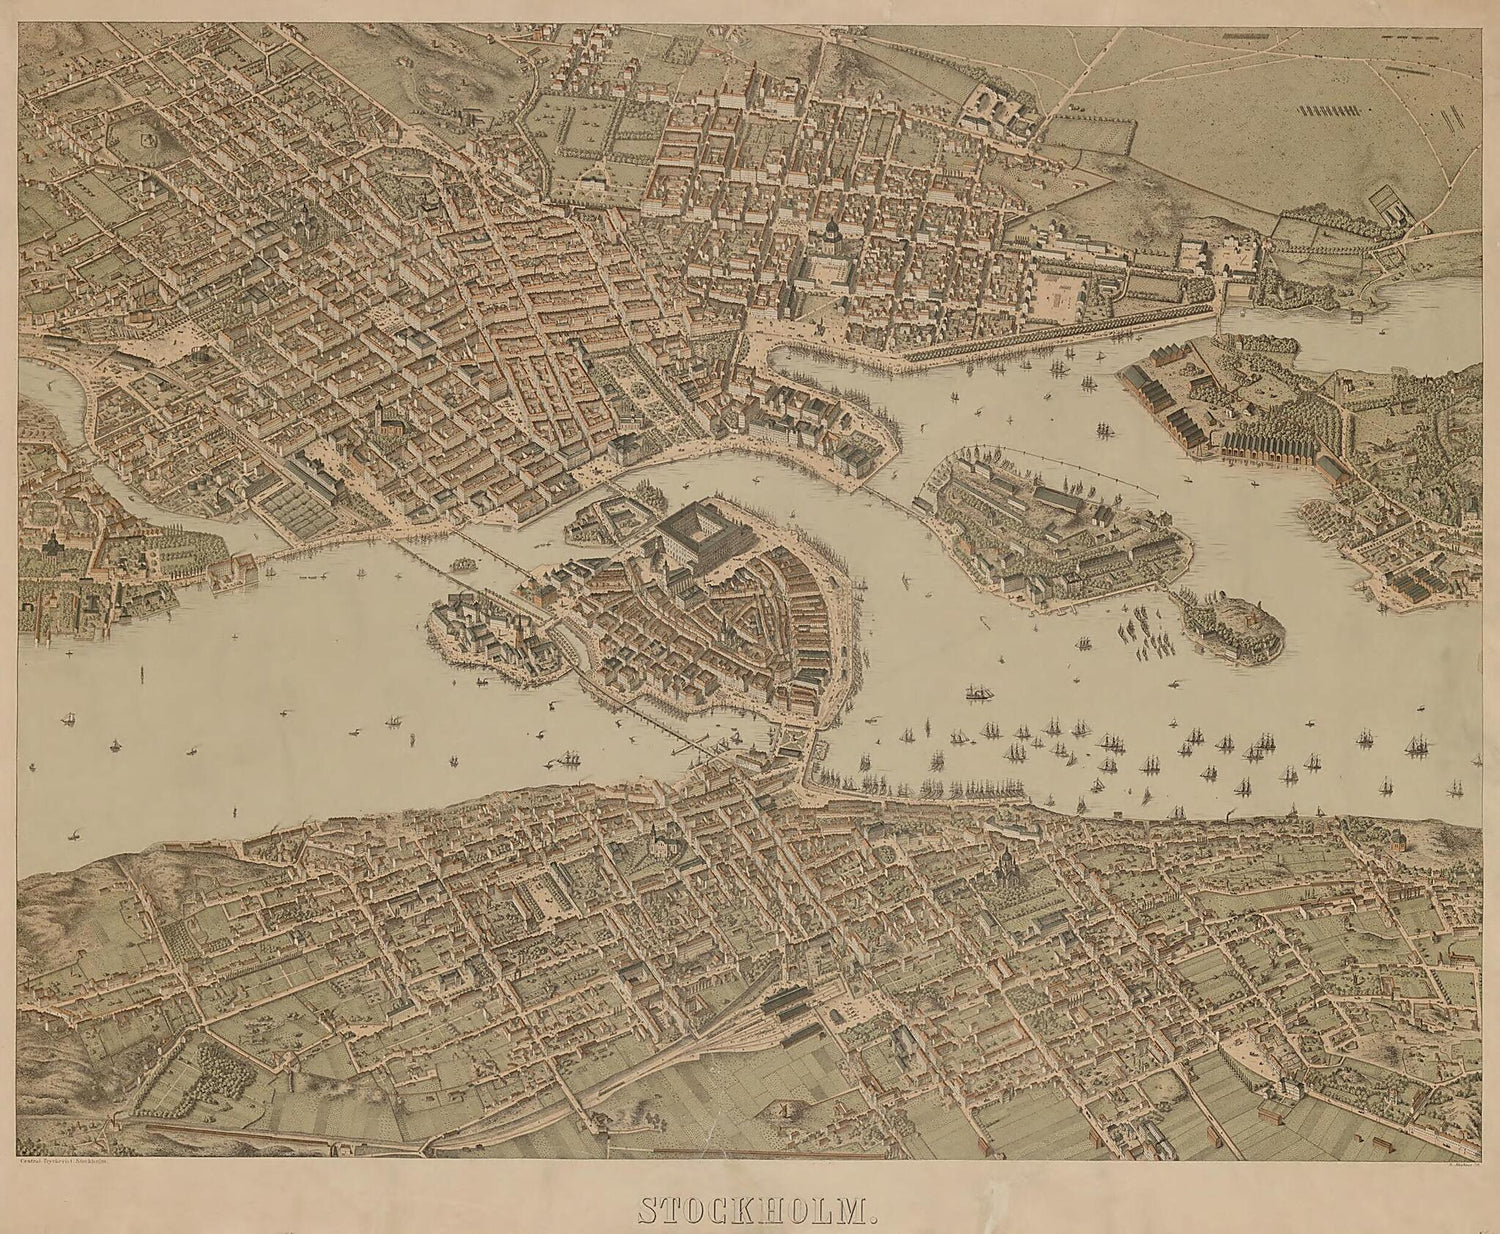 This old map of Stockholm from 1870 was created by Heinrich Neuhaus in 1870